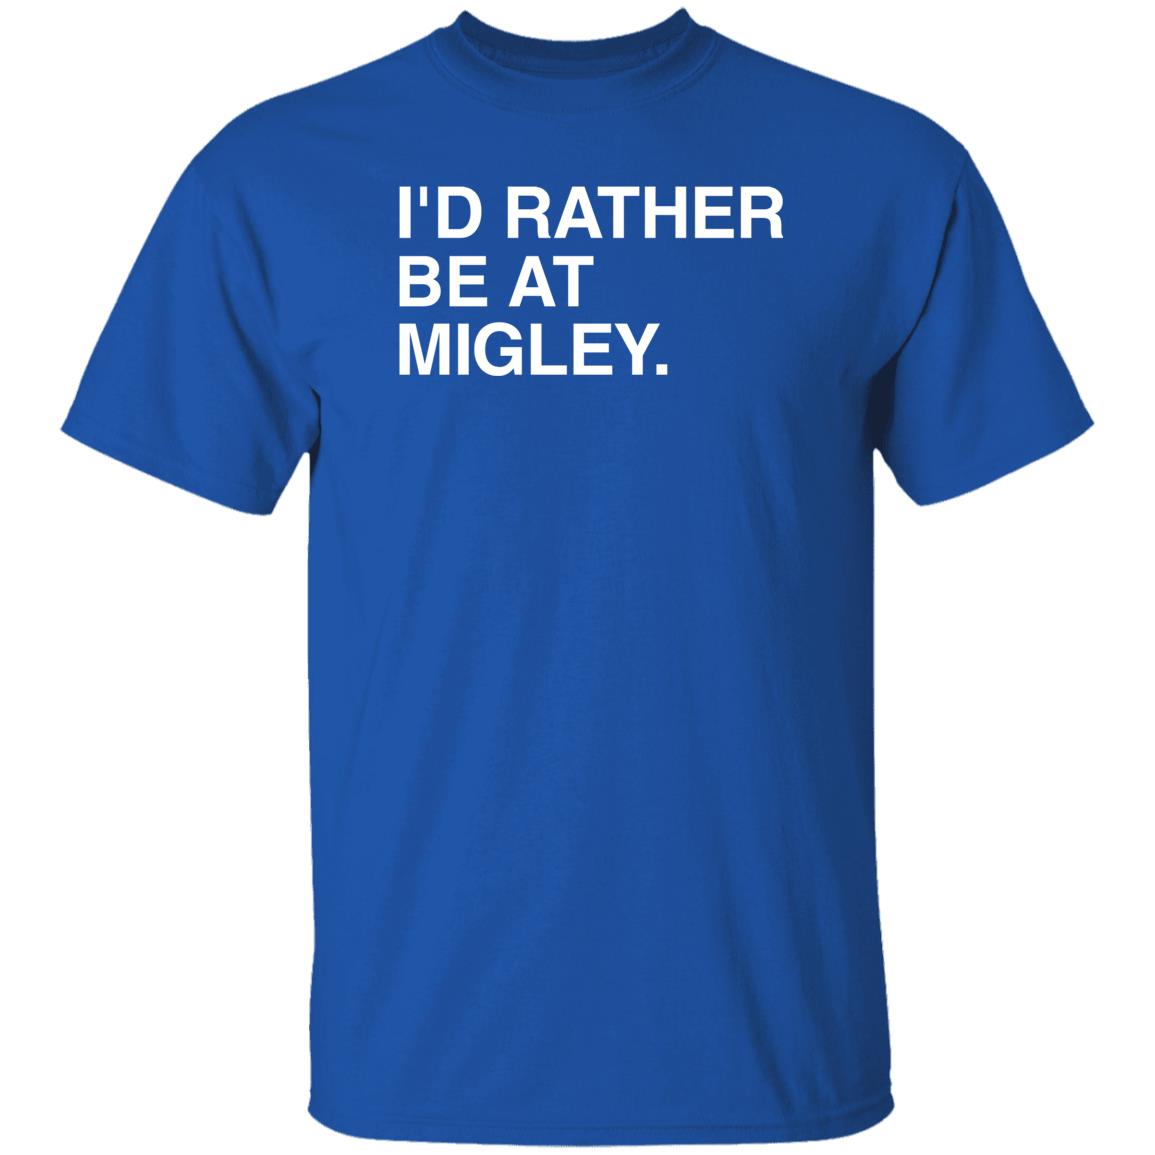 Obvious Shirts Merch I'd Rather Be At Migley Shirt Hometowncup